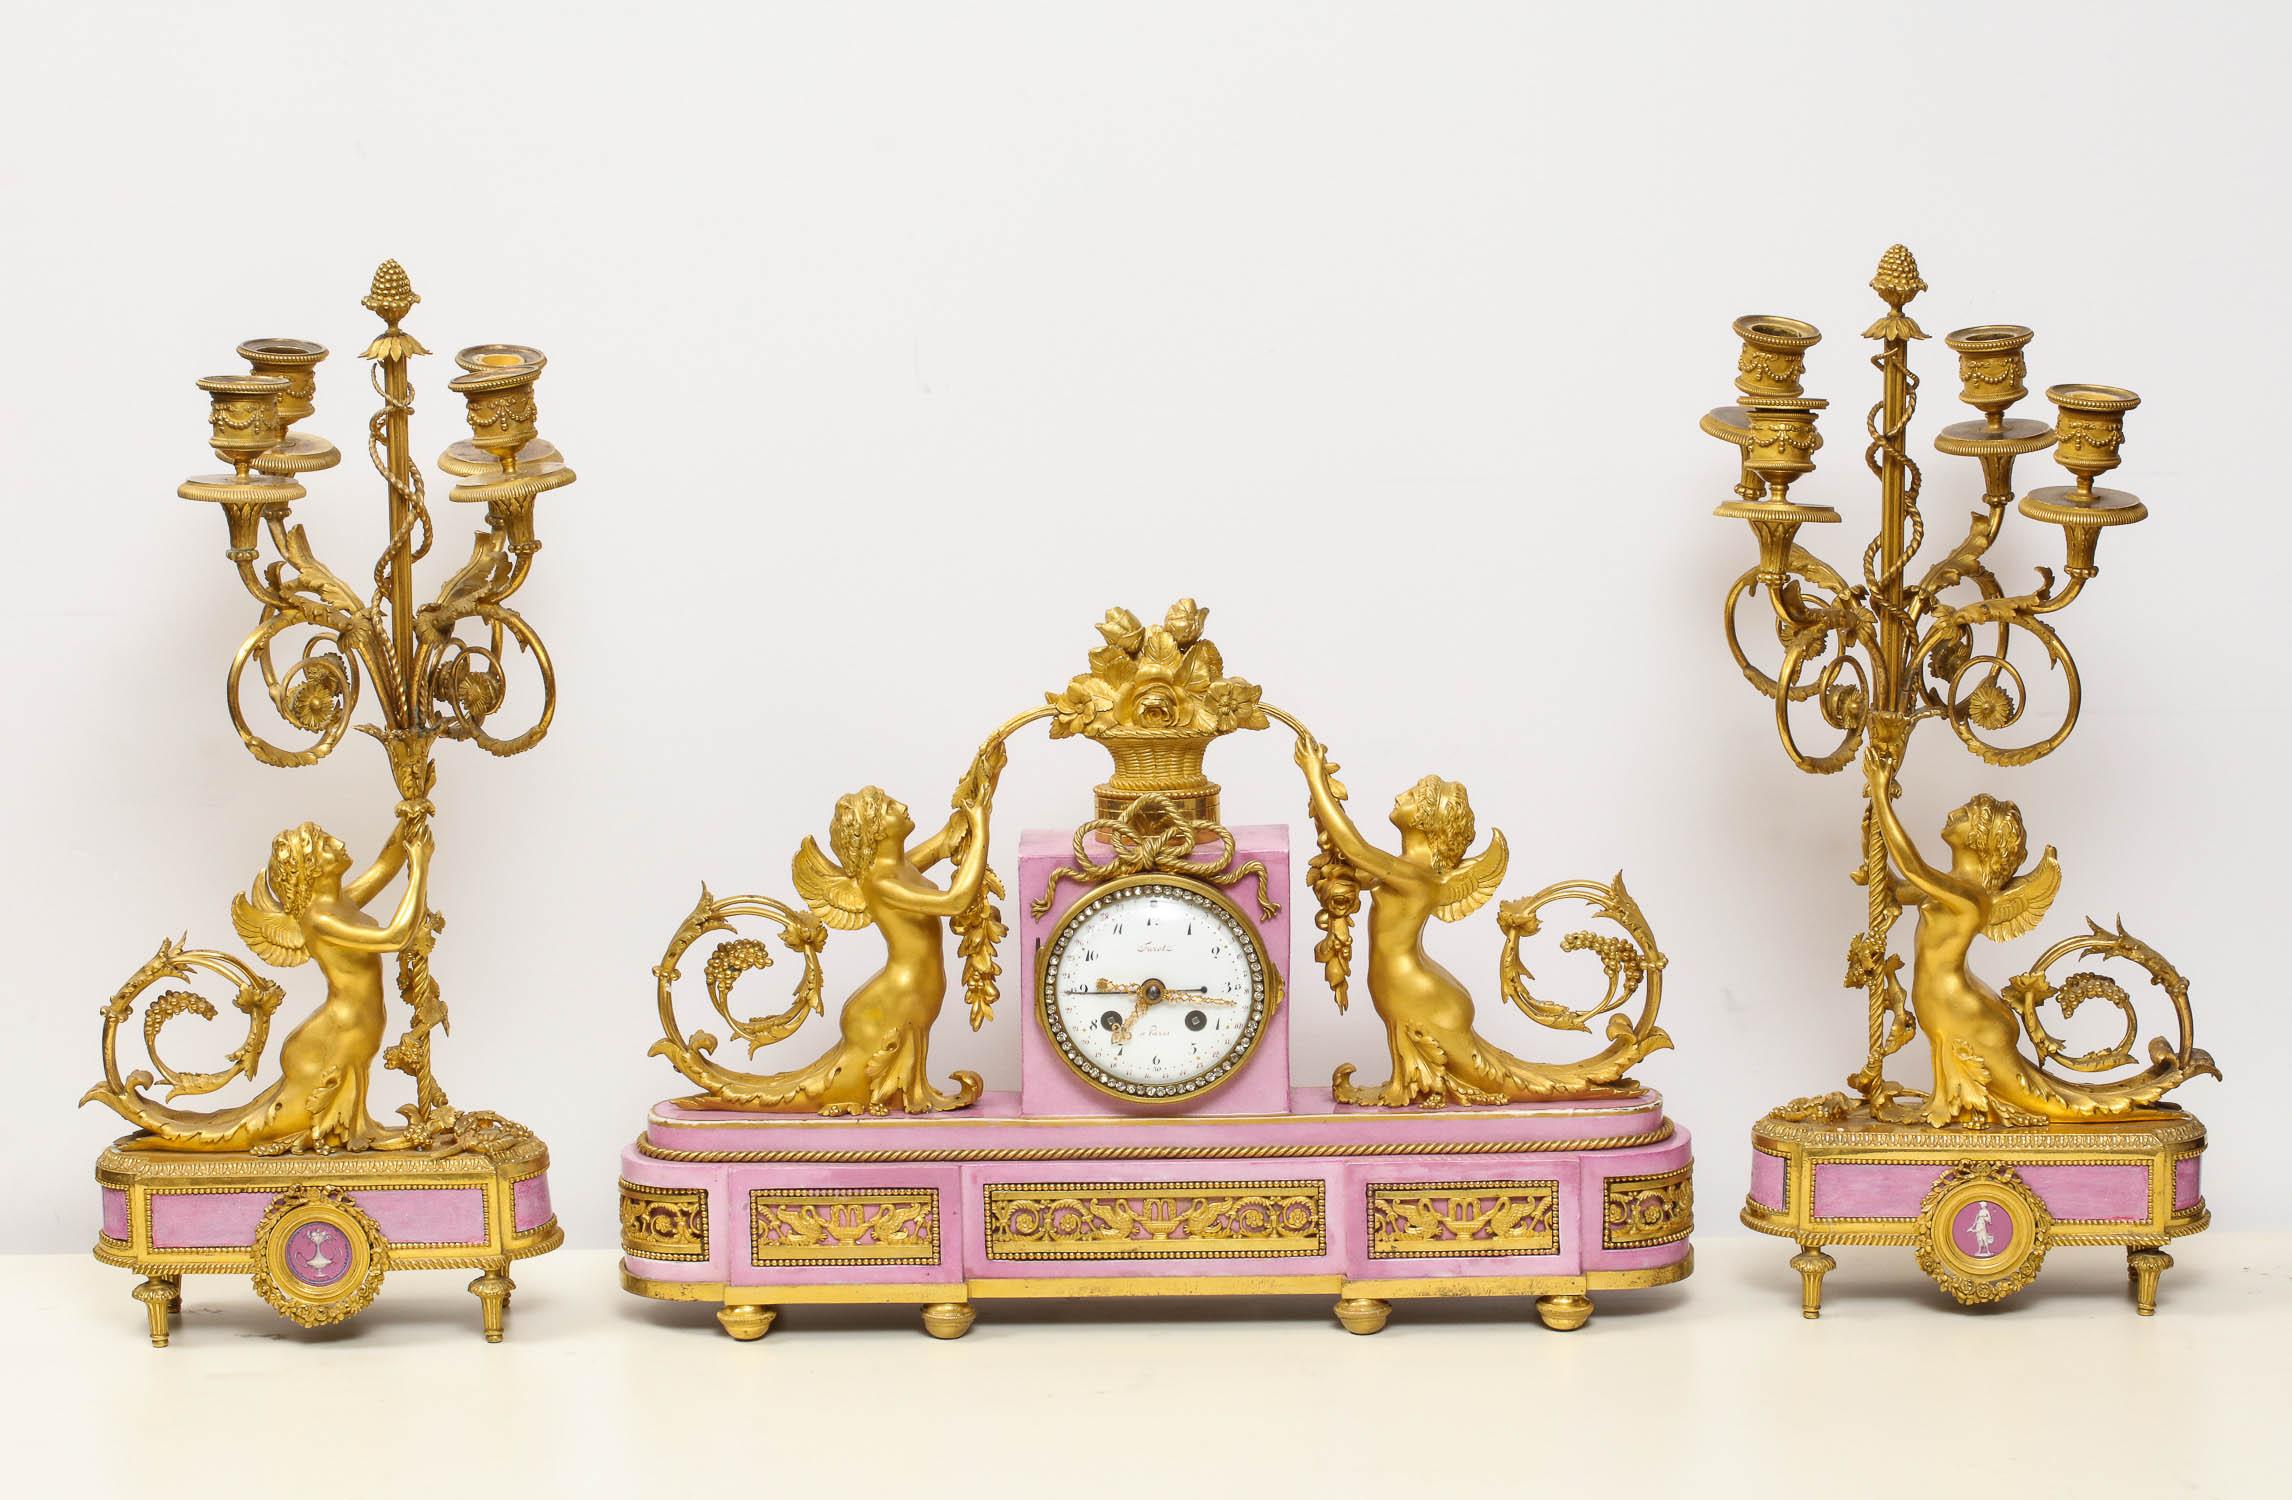 Exquisite French ormolu bronze and pink porcelain three-piece clock set garniture after Francois Remond. 

The clock by Furet A Paris. Design of the case after Francois Rémond (circa 1747-1812) French chaser, engraver, founder and gilder.

Dial